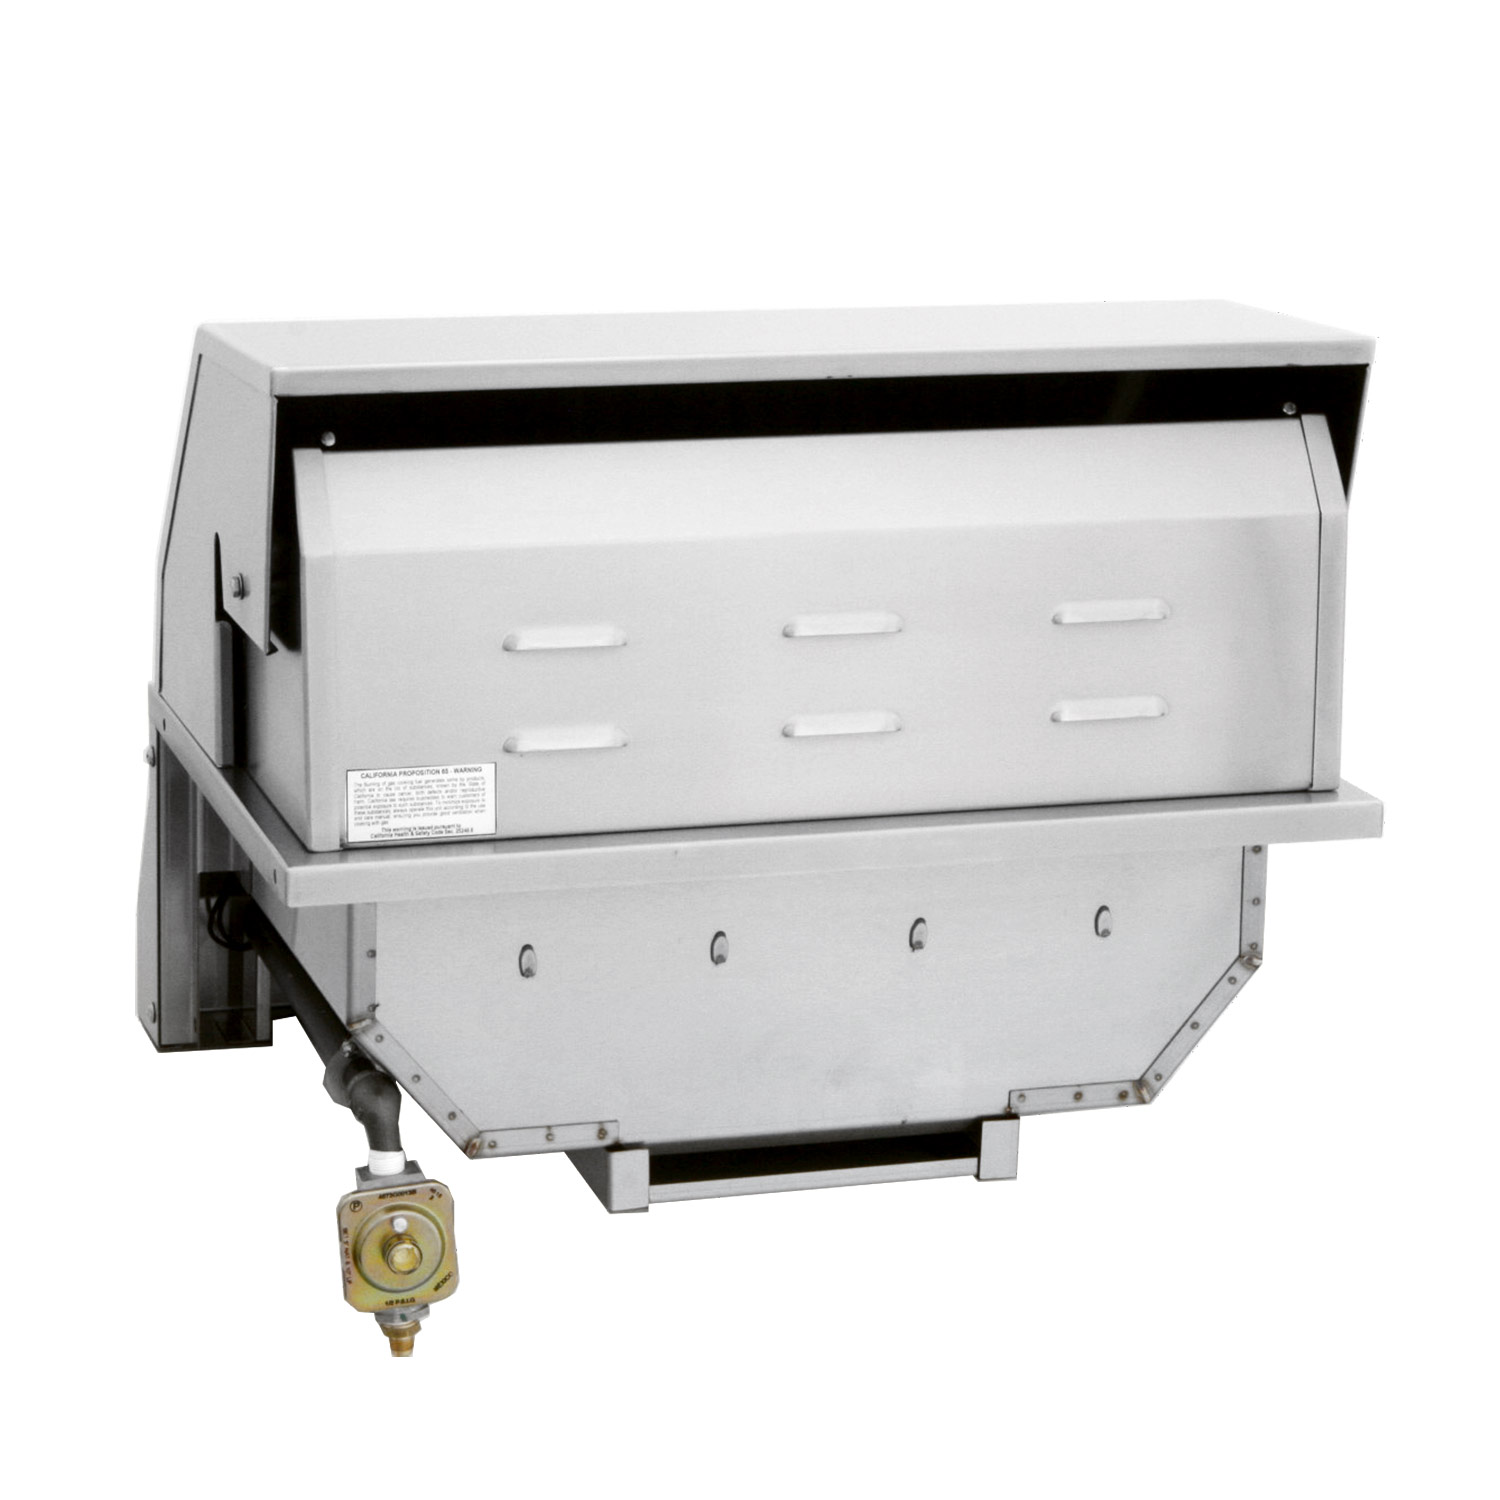 Solaire Standard Infrared Built-In Grill, 27-Inches, Natural Gas - image 4 of 6